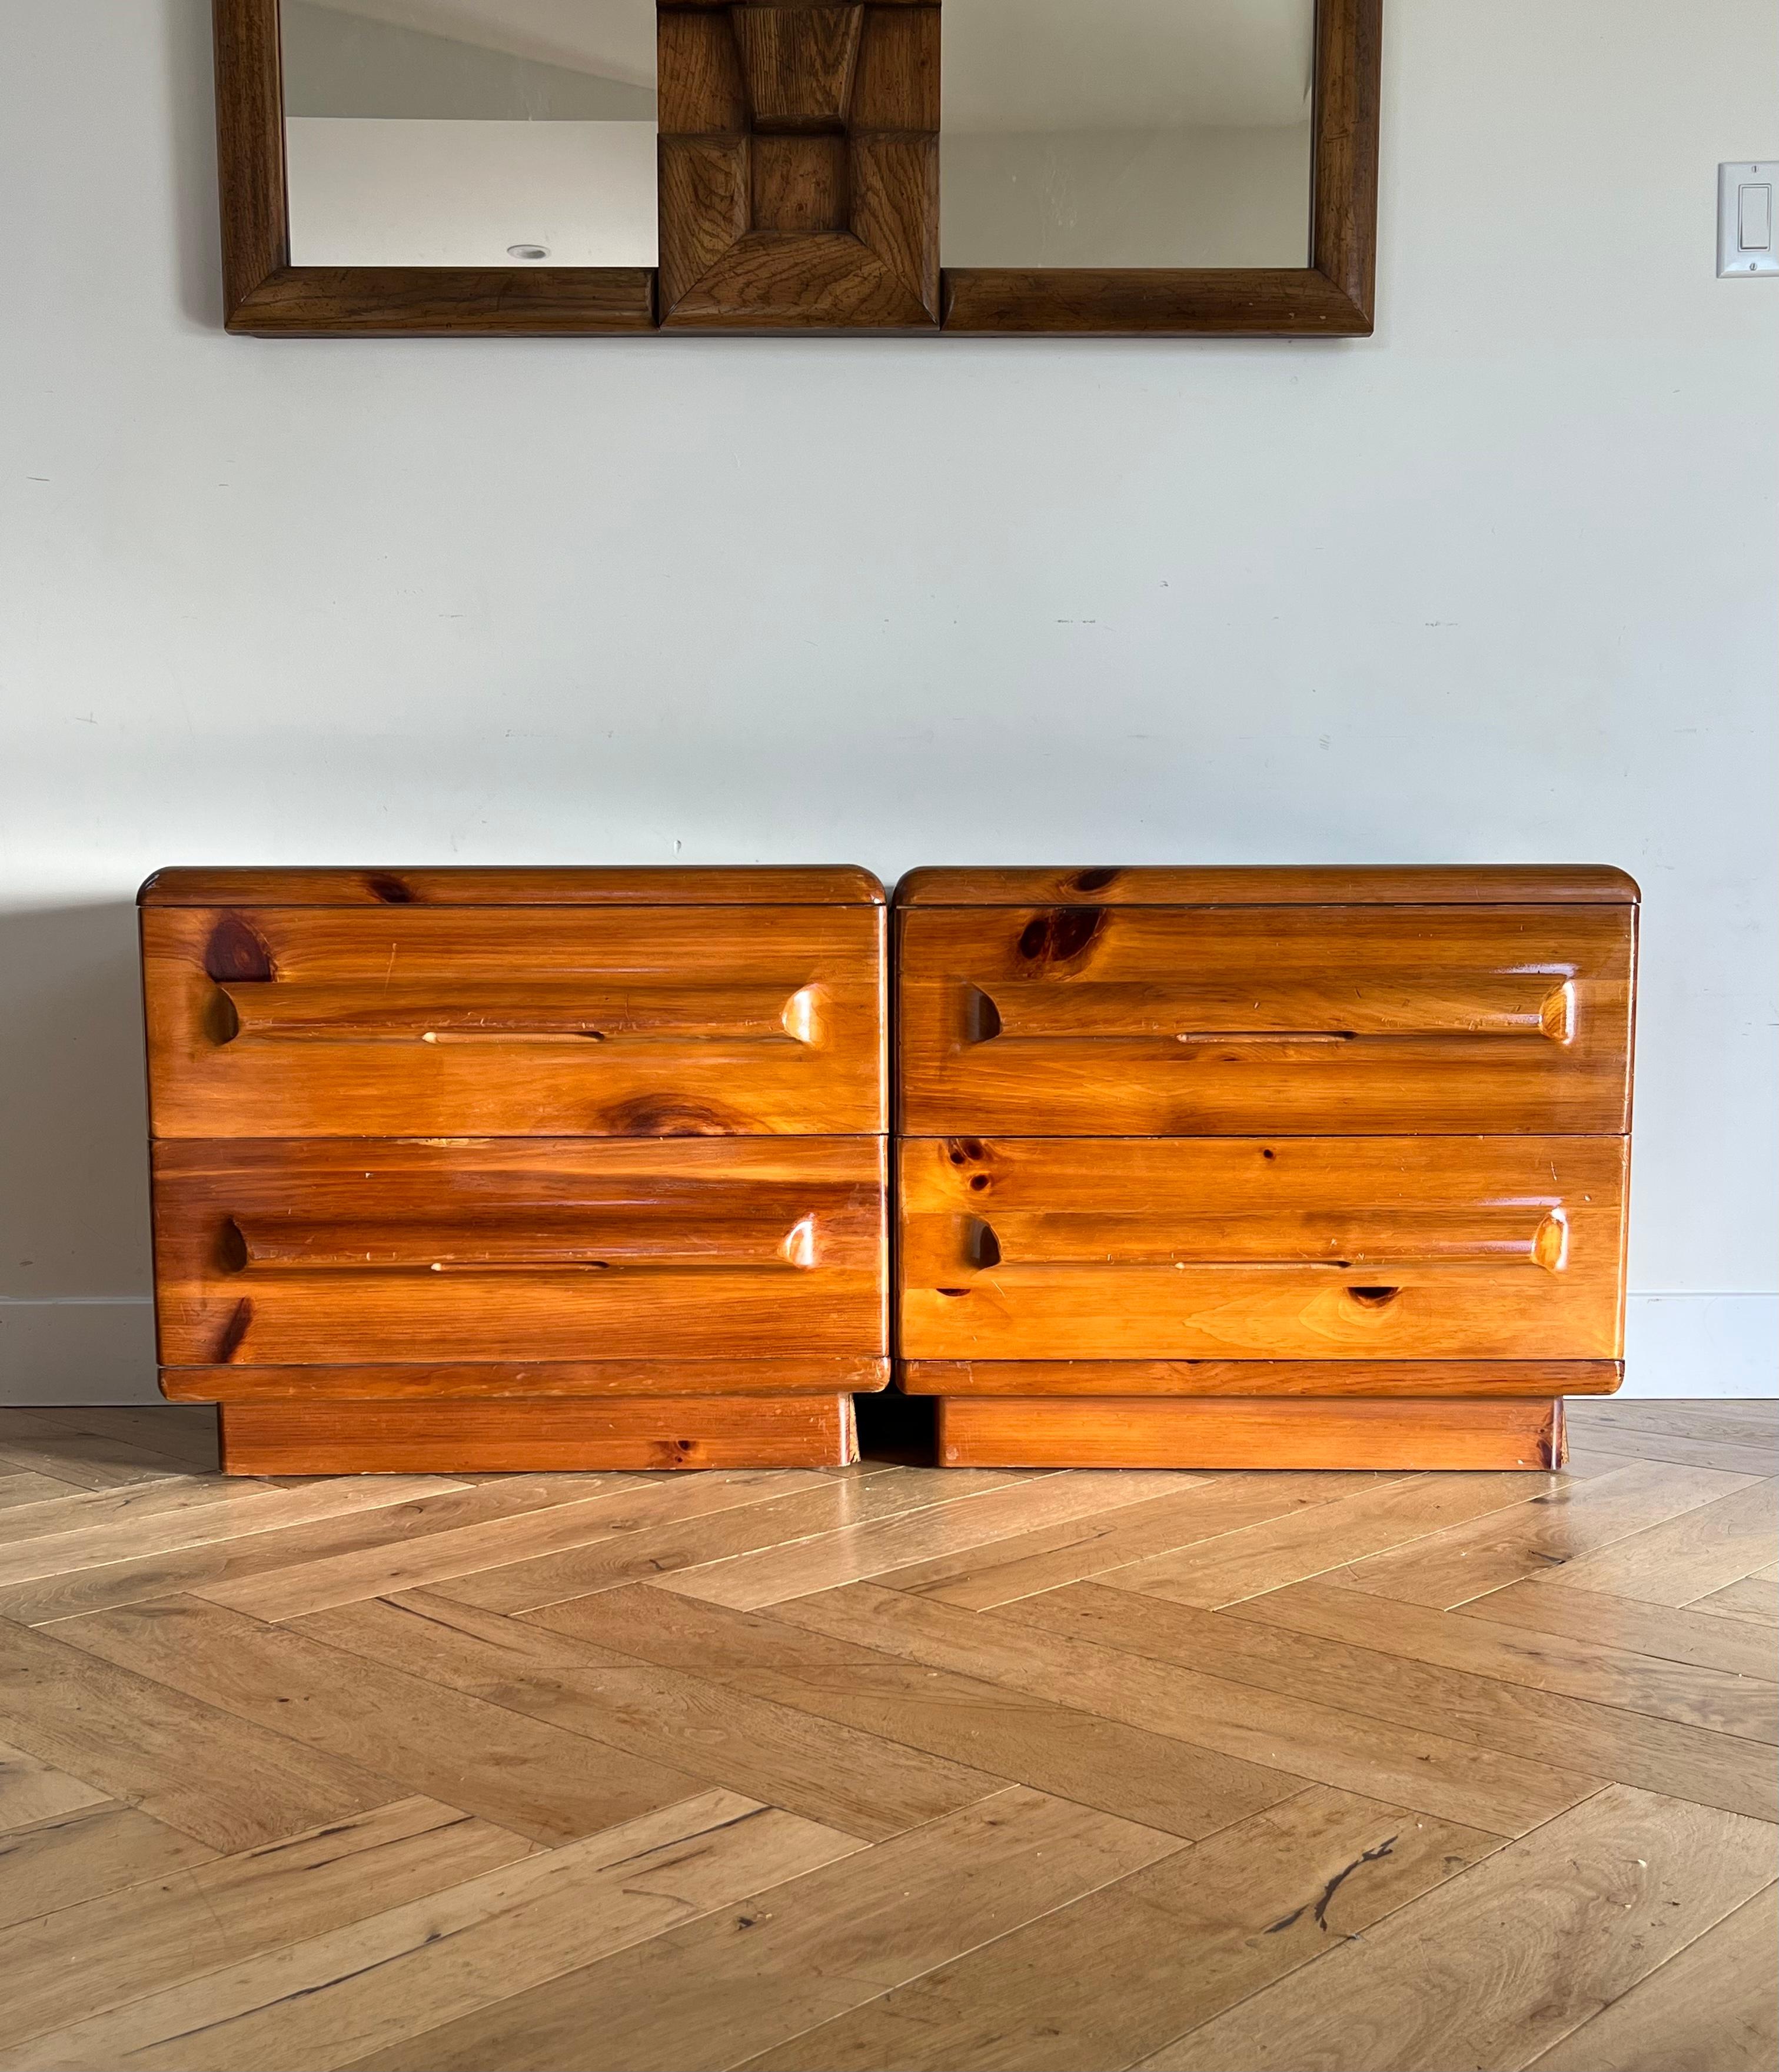 A pair of Broyhill nightstands with exceptional wood grain, 1970s. Wood is believed to be Douglas Fir. Handles are hand-carved in streamline fashion, with the pull discreetly underneath. Minor signs of age are shown in photos. Made in America.
Pick